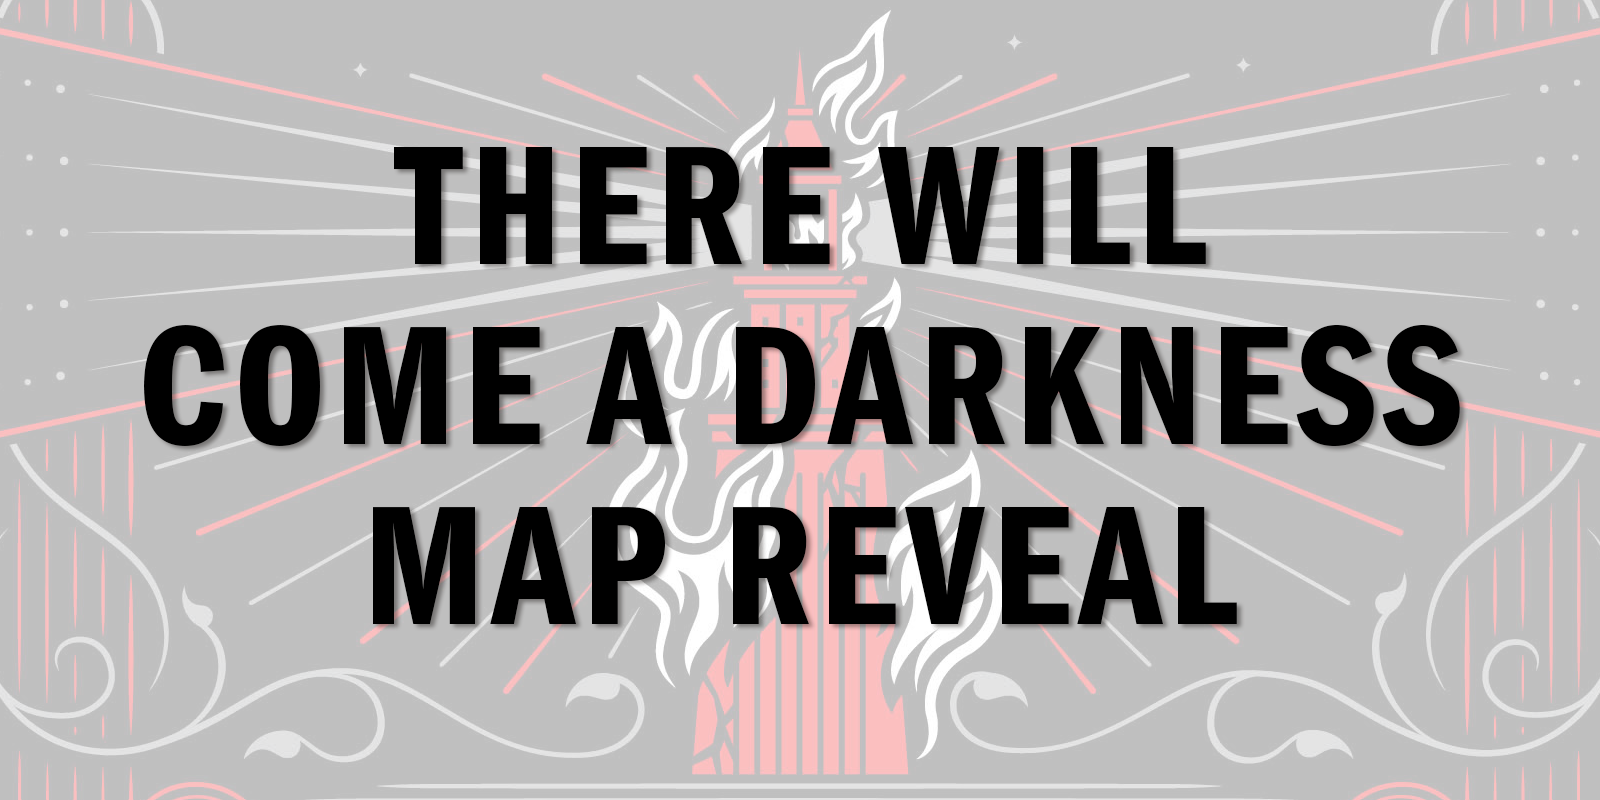 Check Out the Map for There Will Come a Darkness